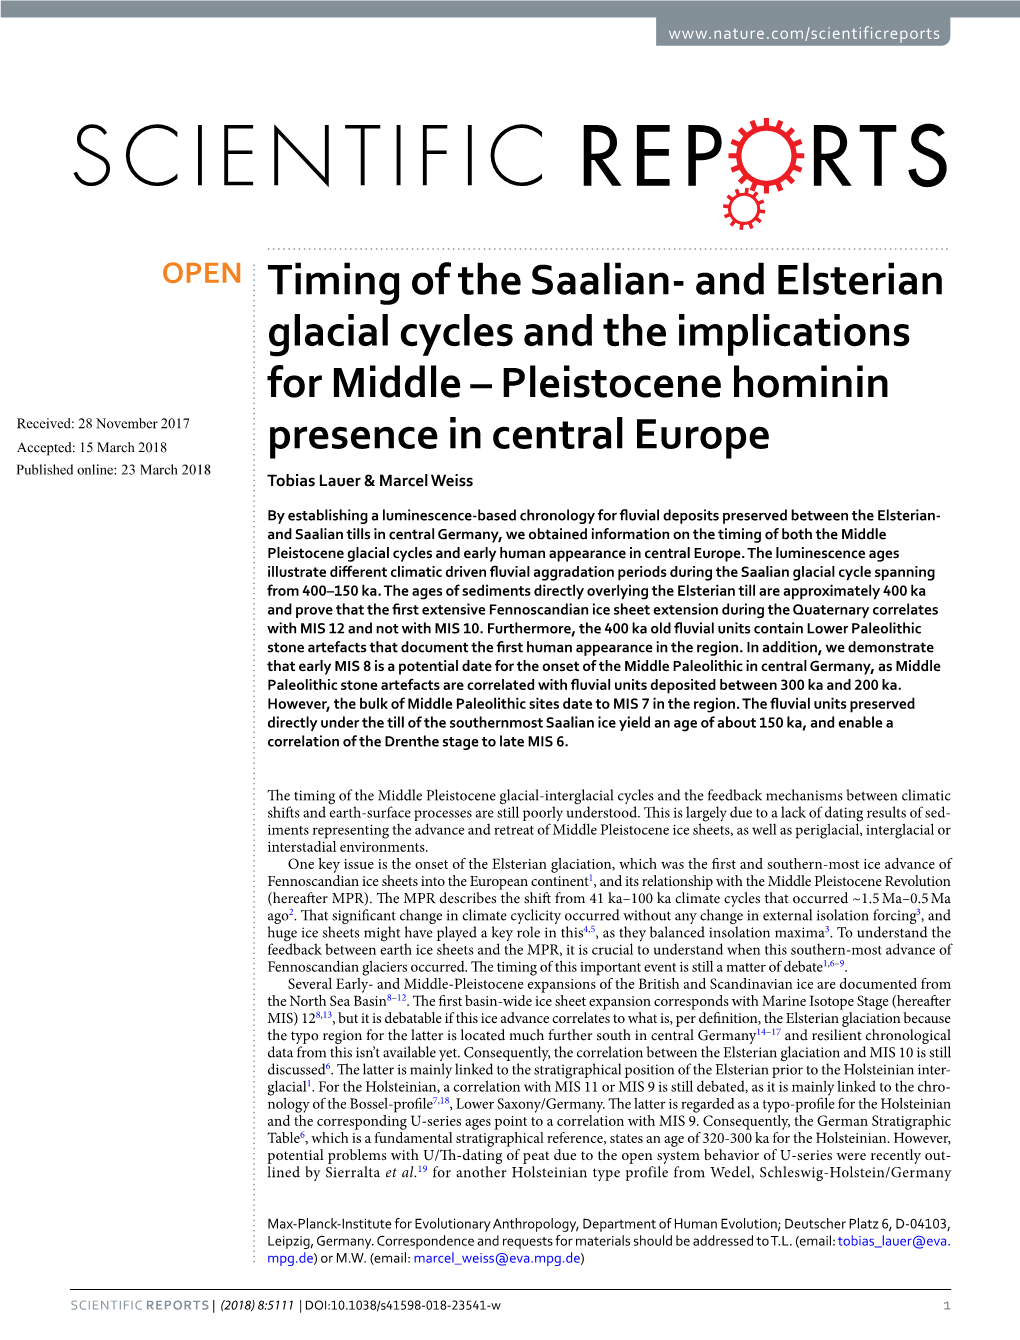 Timing of the Saalian- and Elsterian Glacial Cycles and The